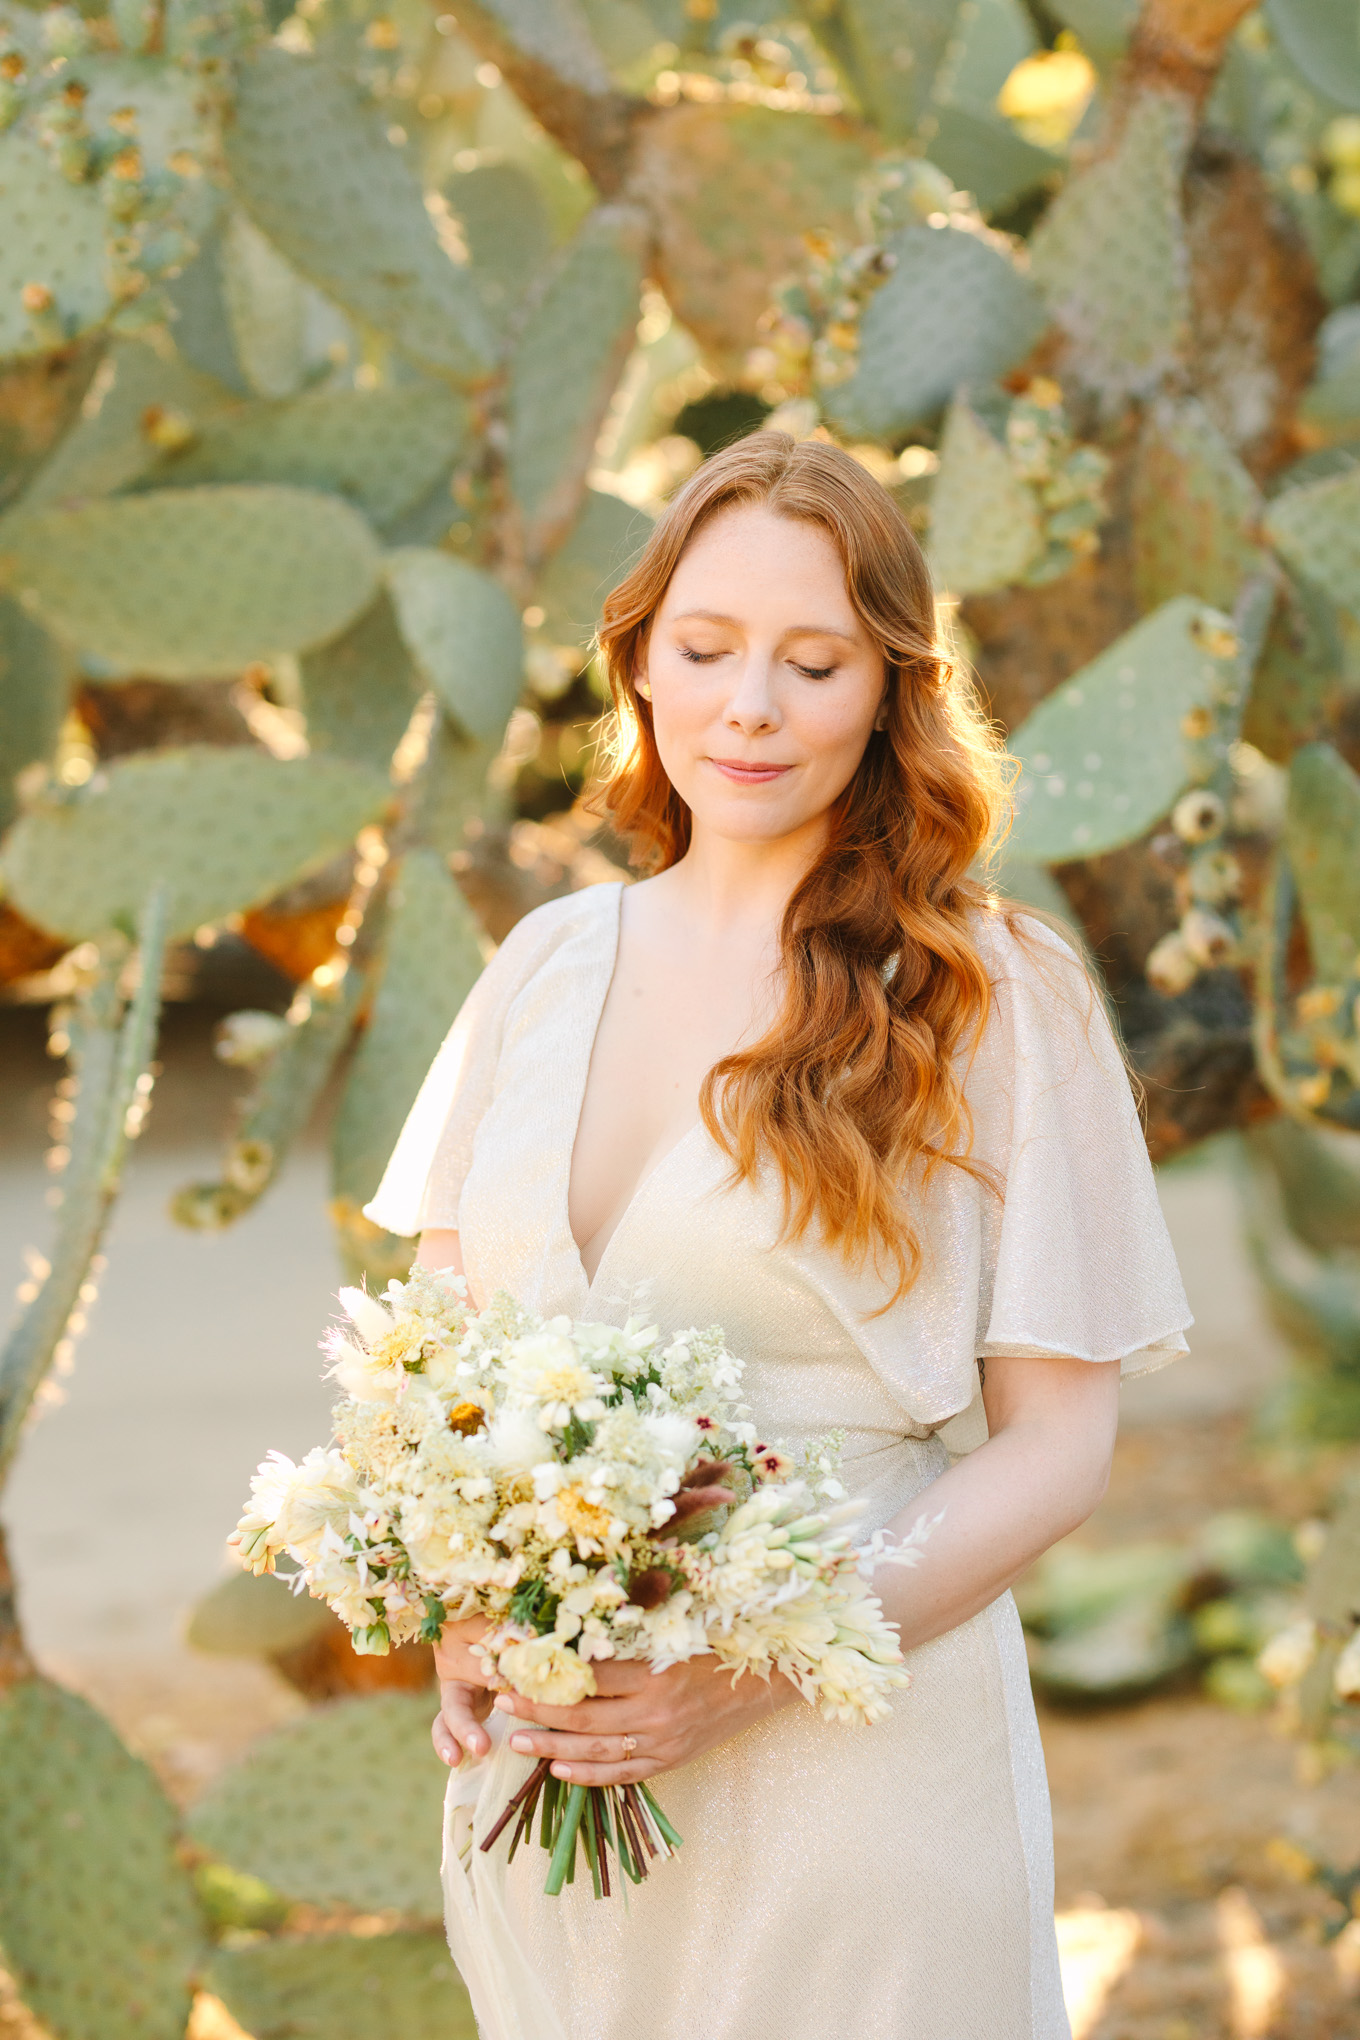 Bride in LA Arboretum cactus garden | Best Southern California Garden Wedding Venues | Colorful and elevated wedding photography for fun-loving couples | #gardenvenue #weddingvenue #socalweddingvenue #bouquetideas #uniquebouquet   Source: Mary Costa Photography | Los Angeles 